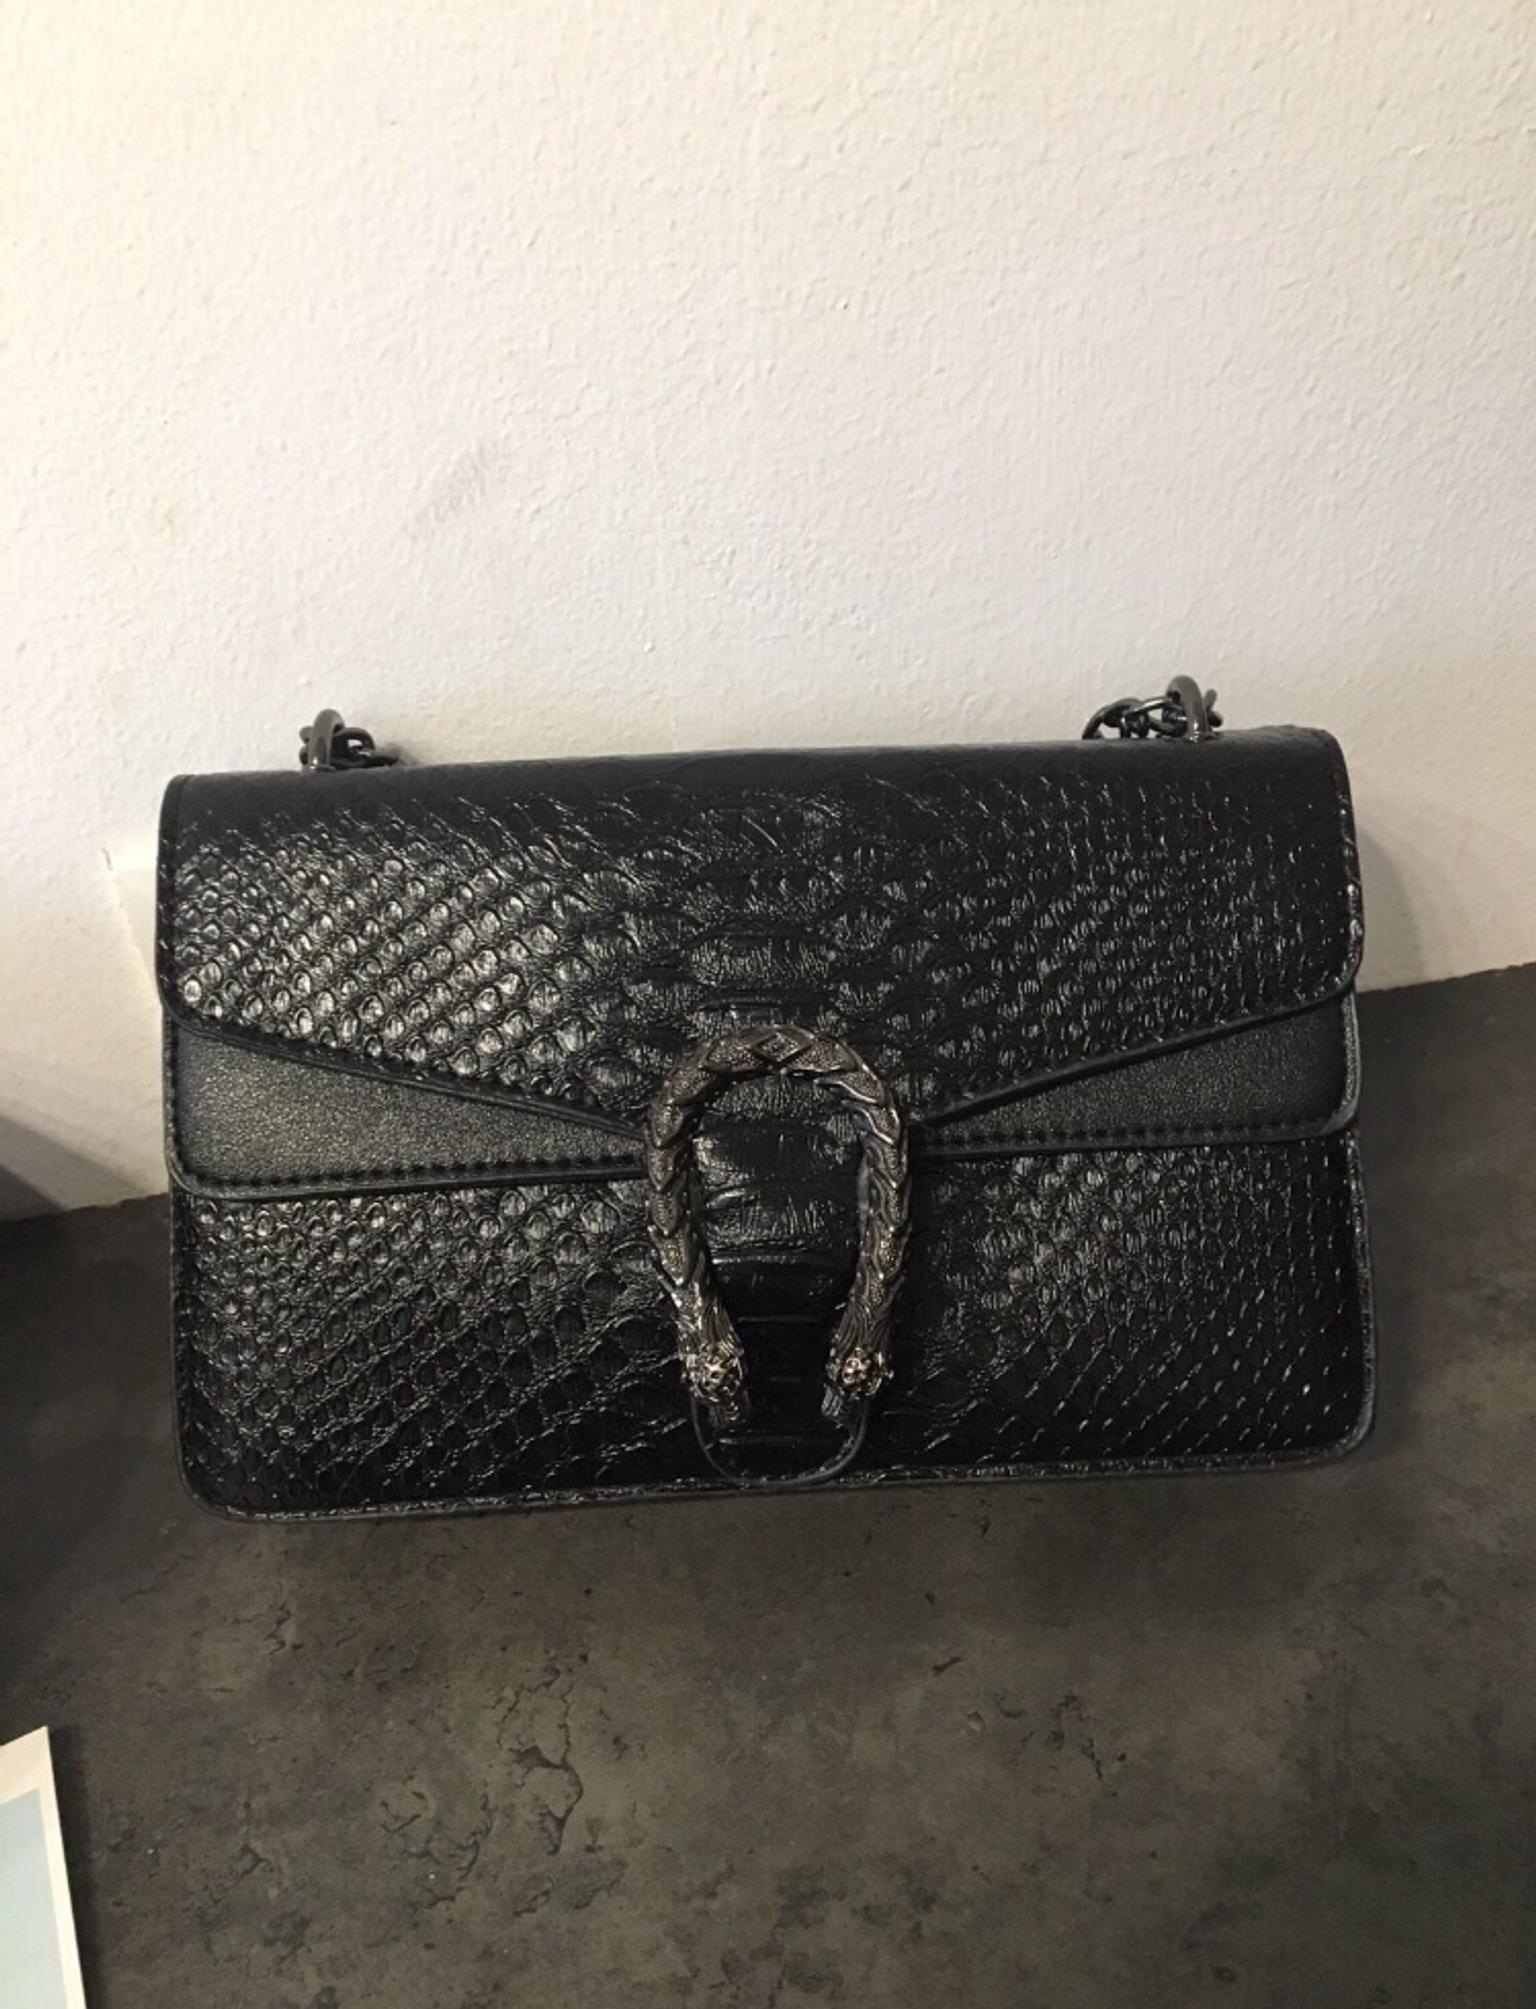 gucci dionysus inspired bag, OFF 78 